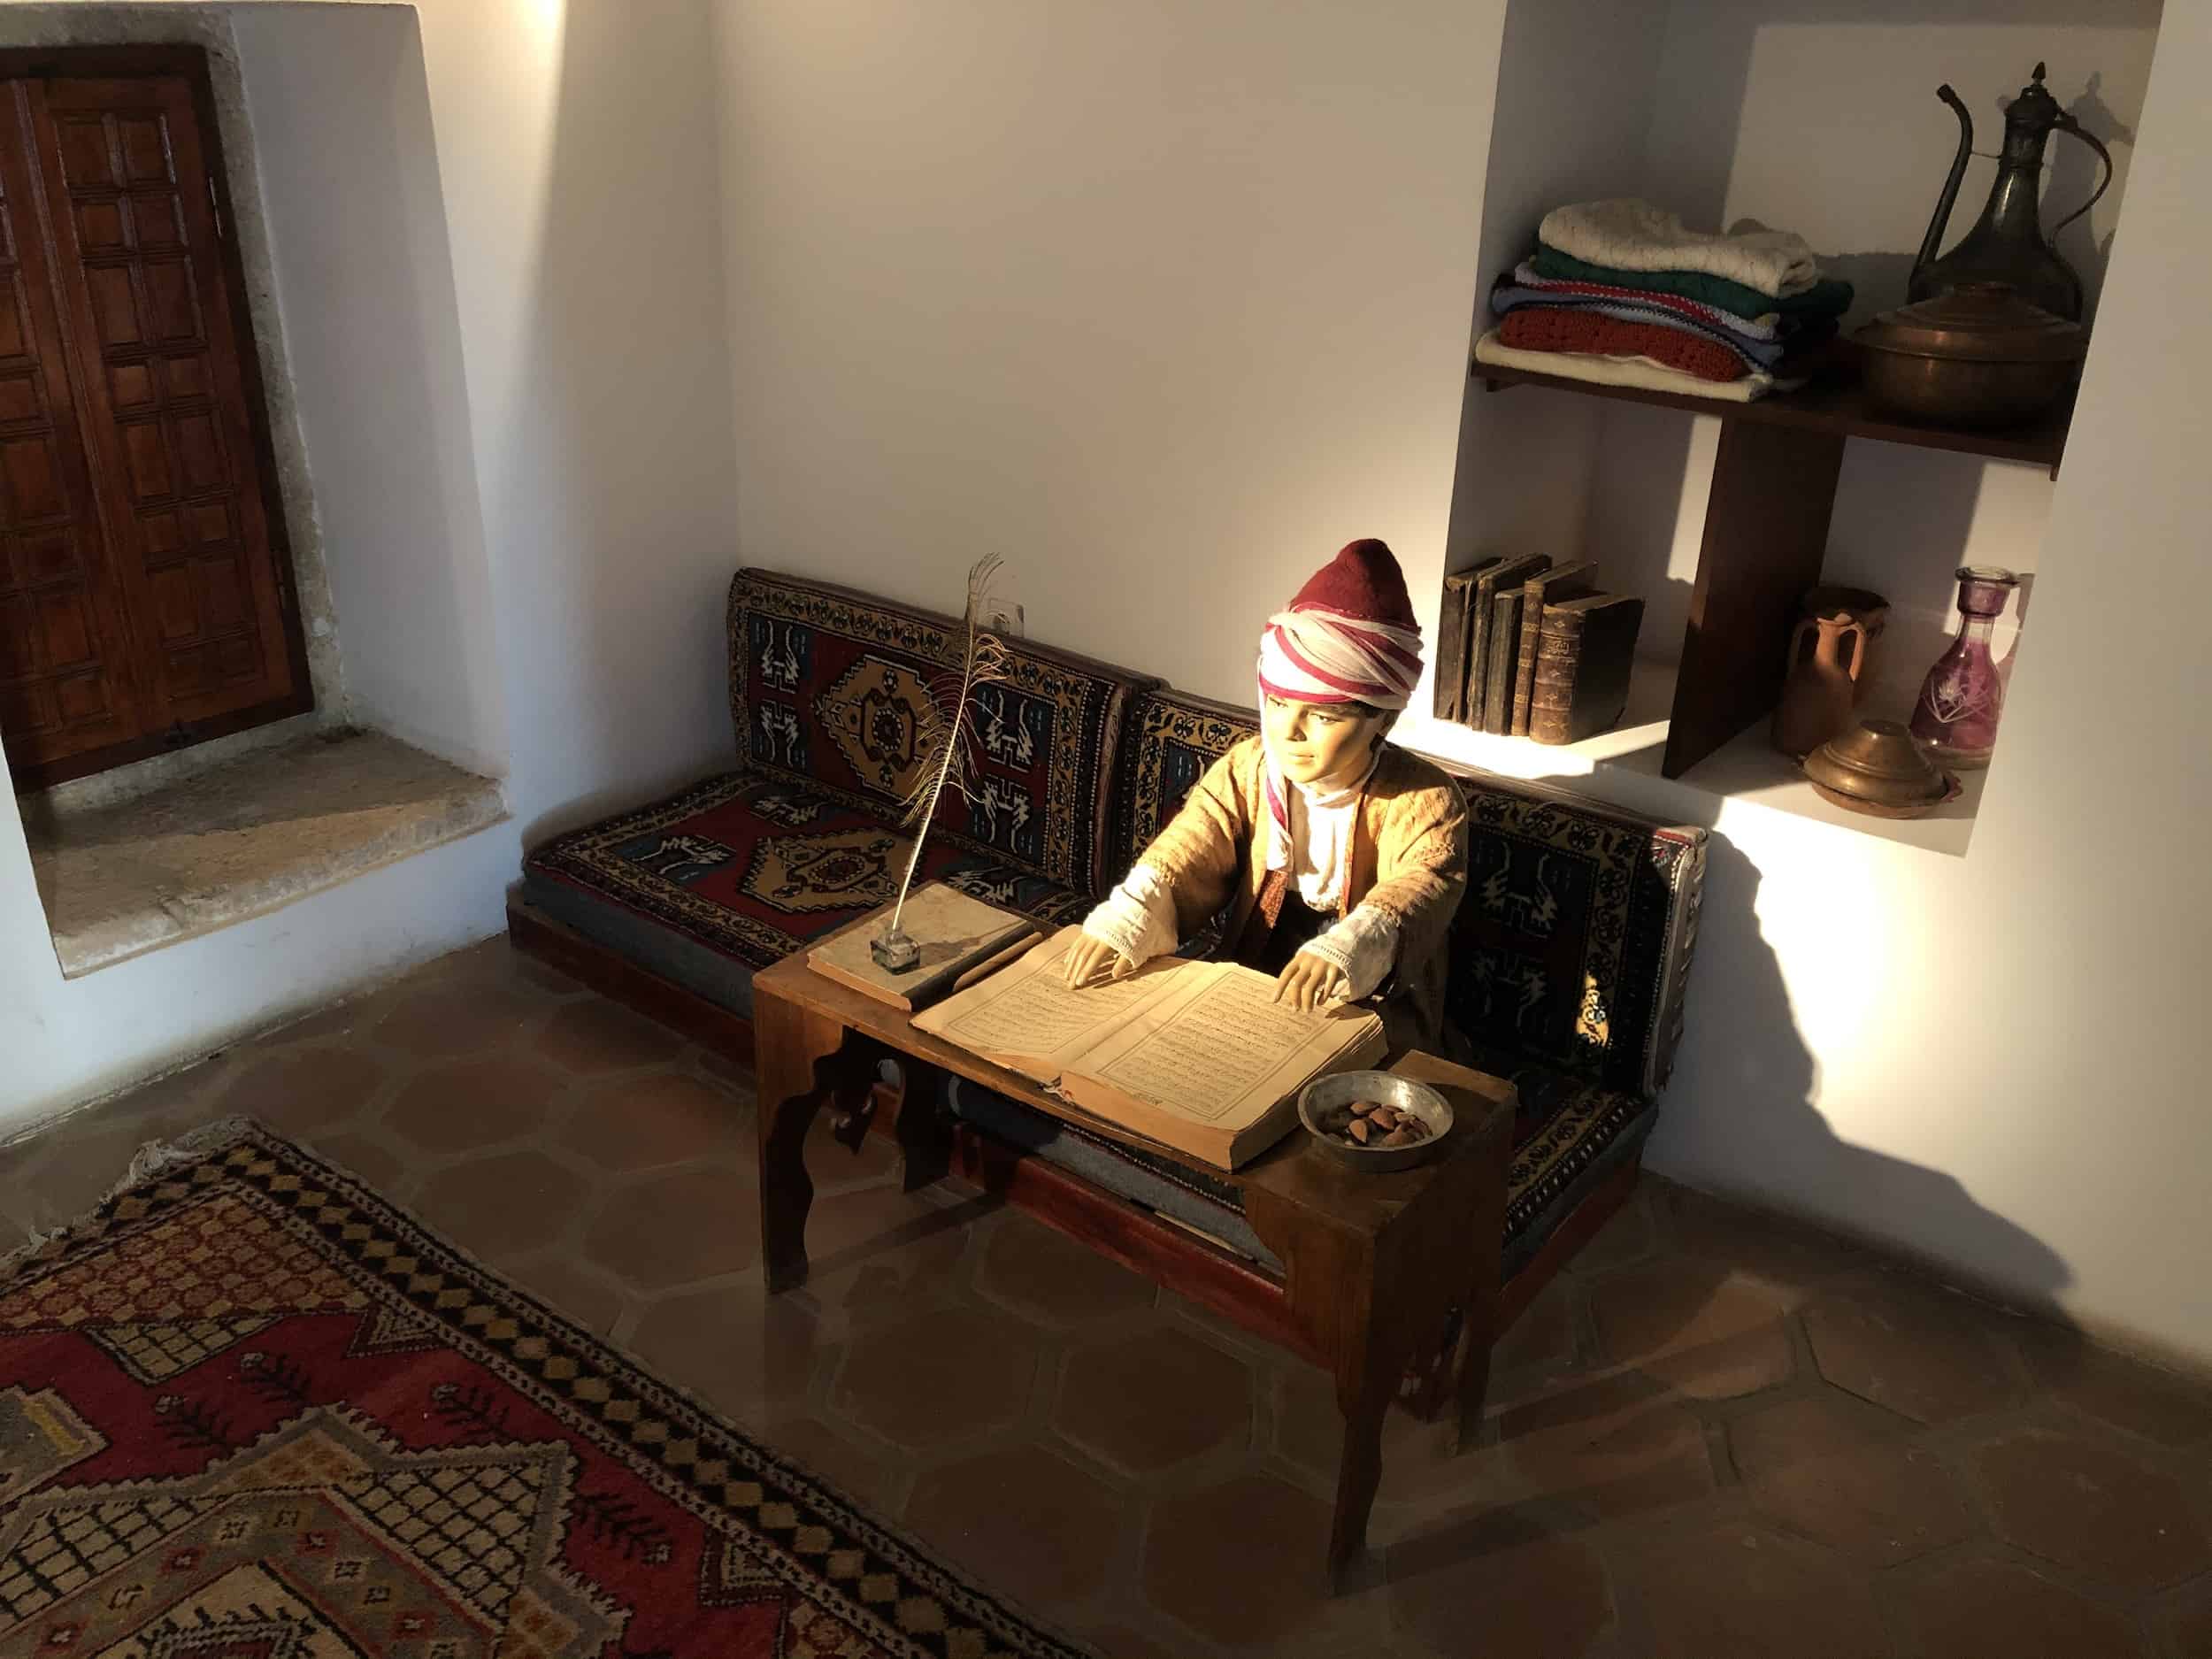 Student cell at the Selimiye Foundation Museum in Edirne, Turkey